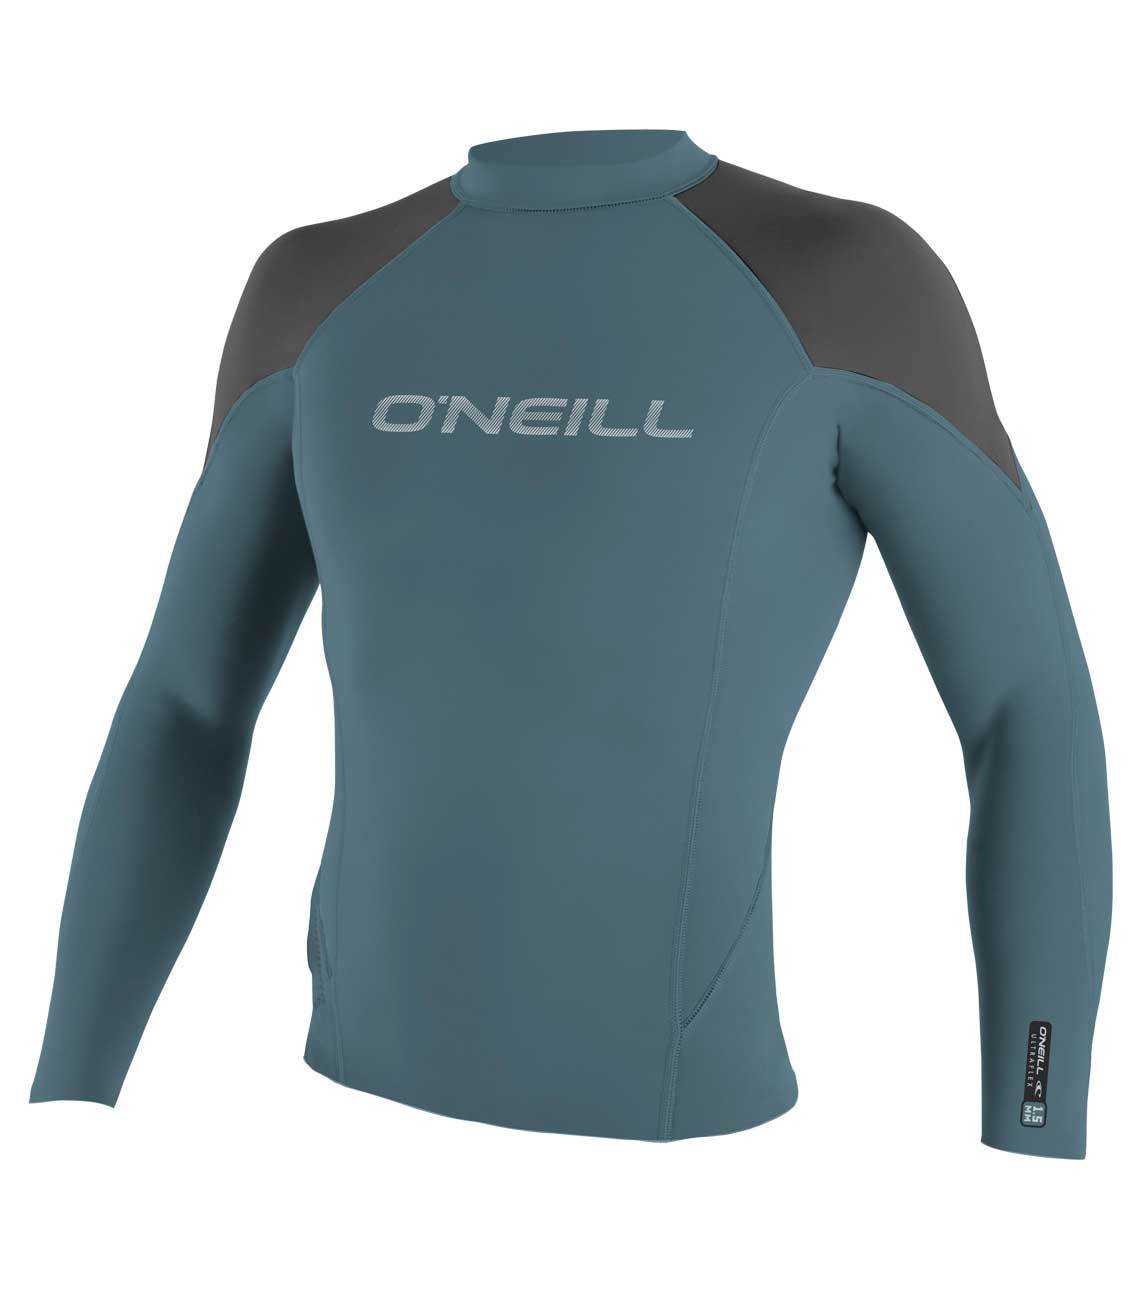 O'neill Hammer 0.5mm LS Crew Wetsuit Top - Dusty Blue Graphite Black Wetsuit Top